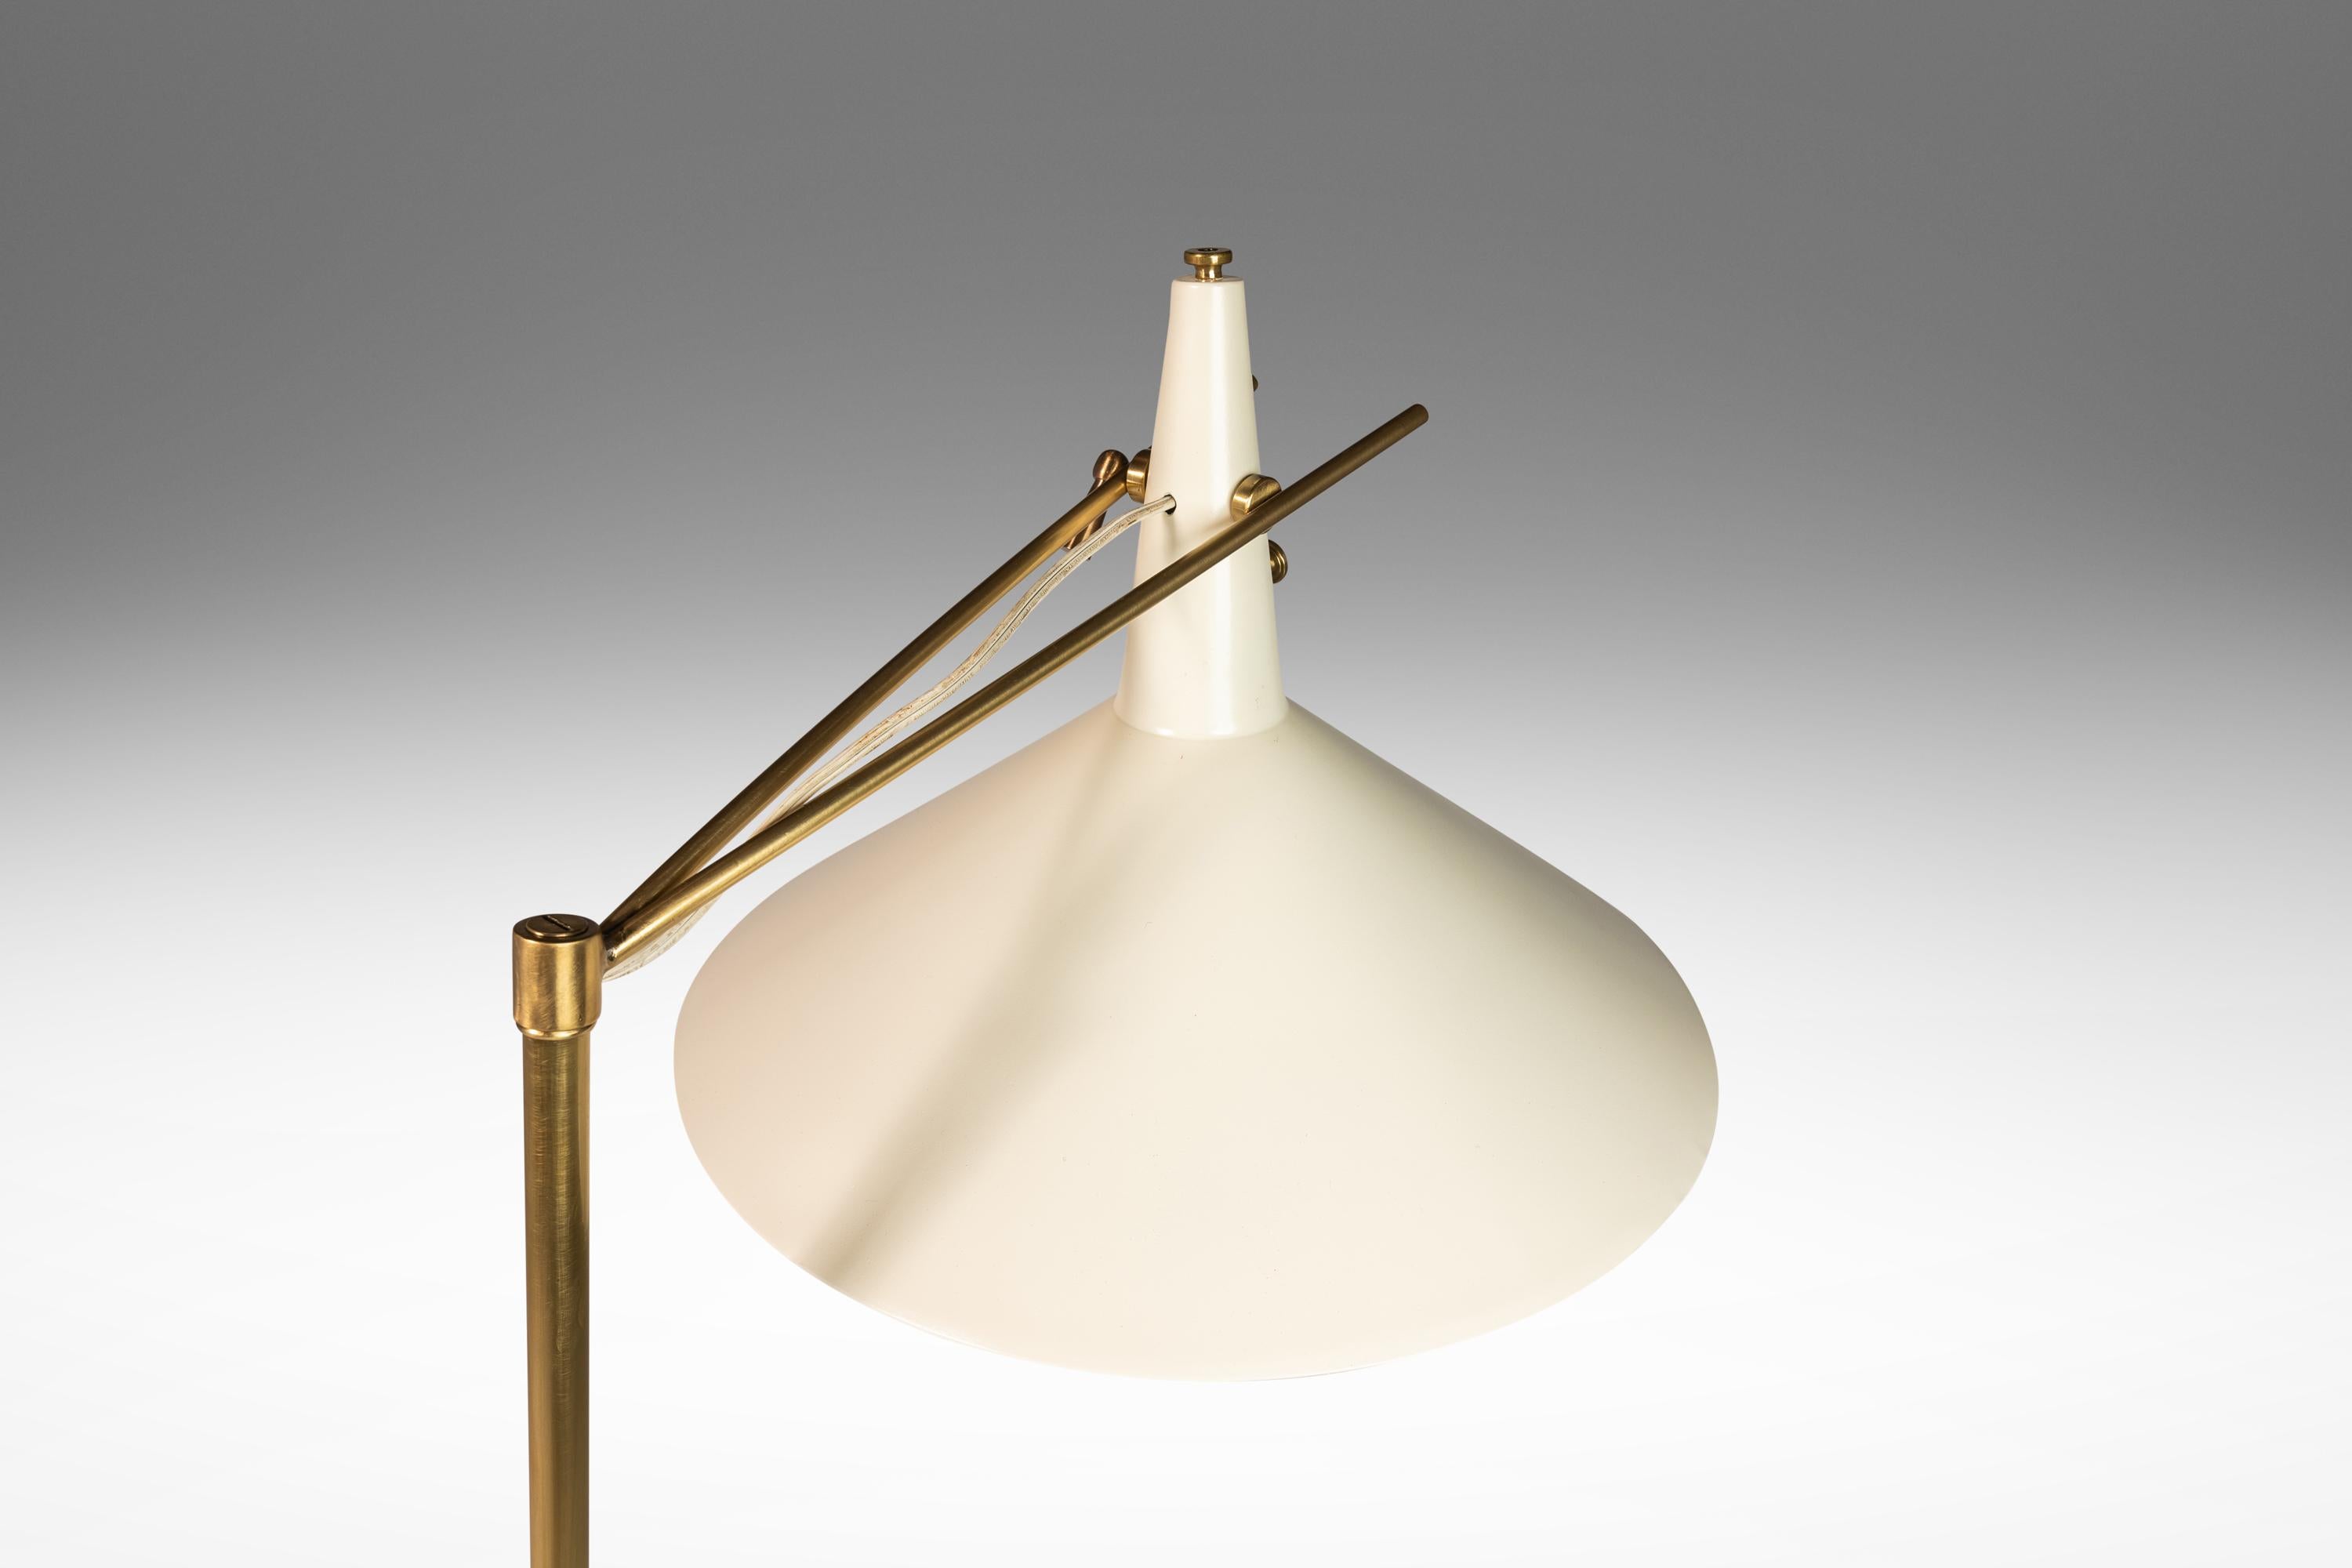 Mid-Century Model E-11 Floor Lamp by Paul McCobb for Directional, USA, c. 1950's For Sale 1